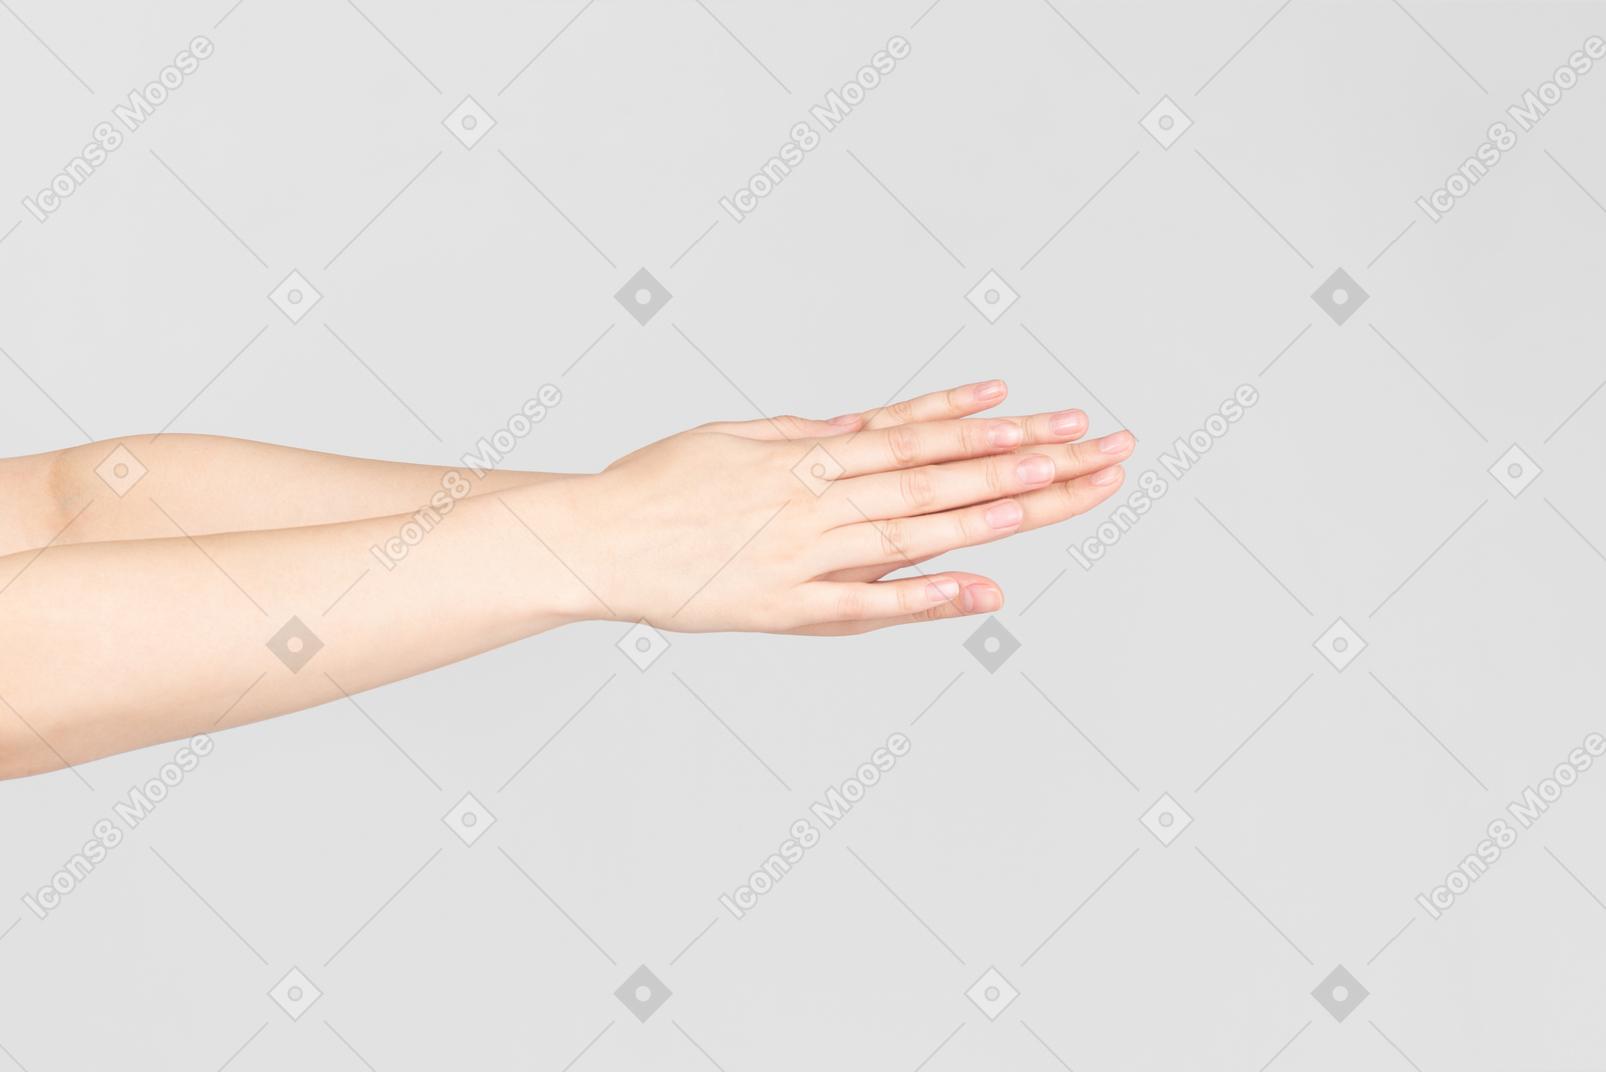 Female hands one touching another